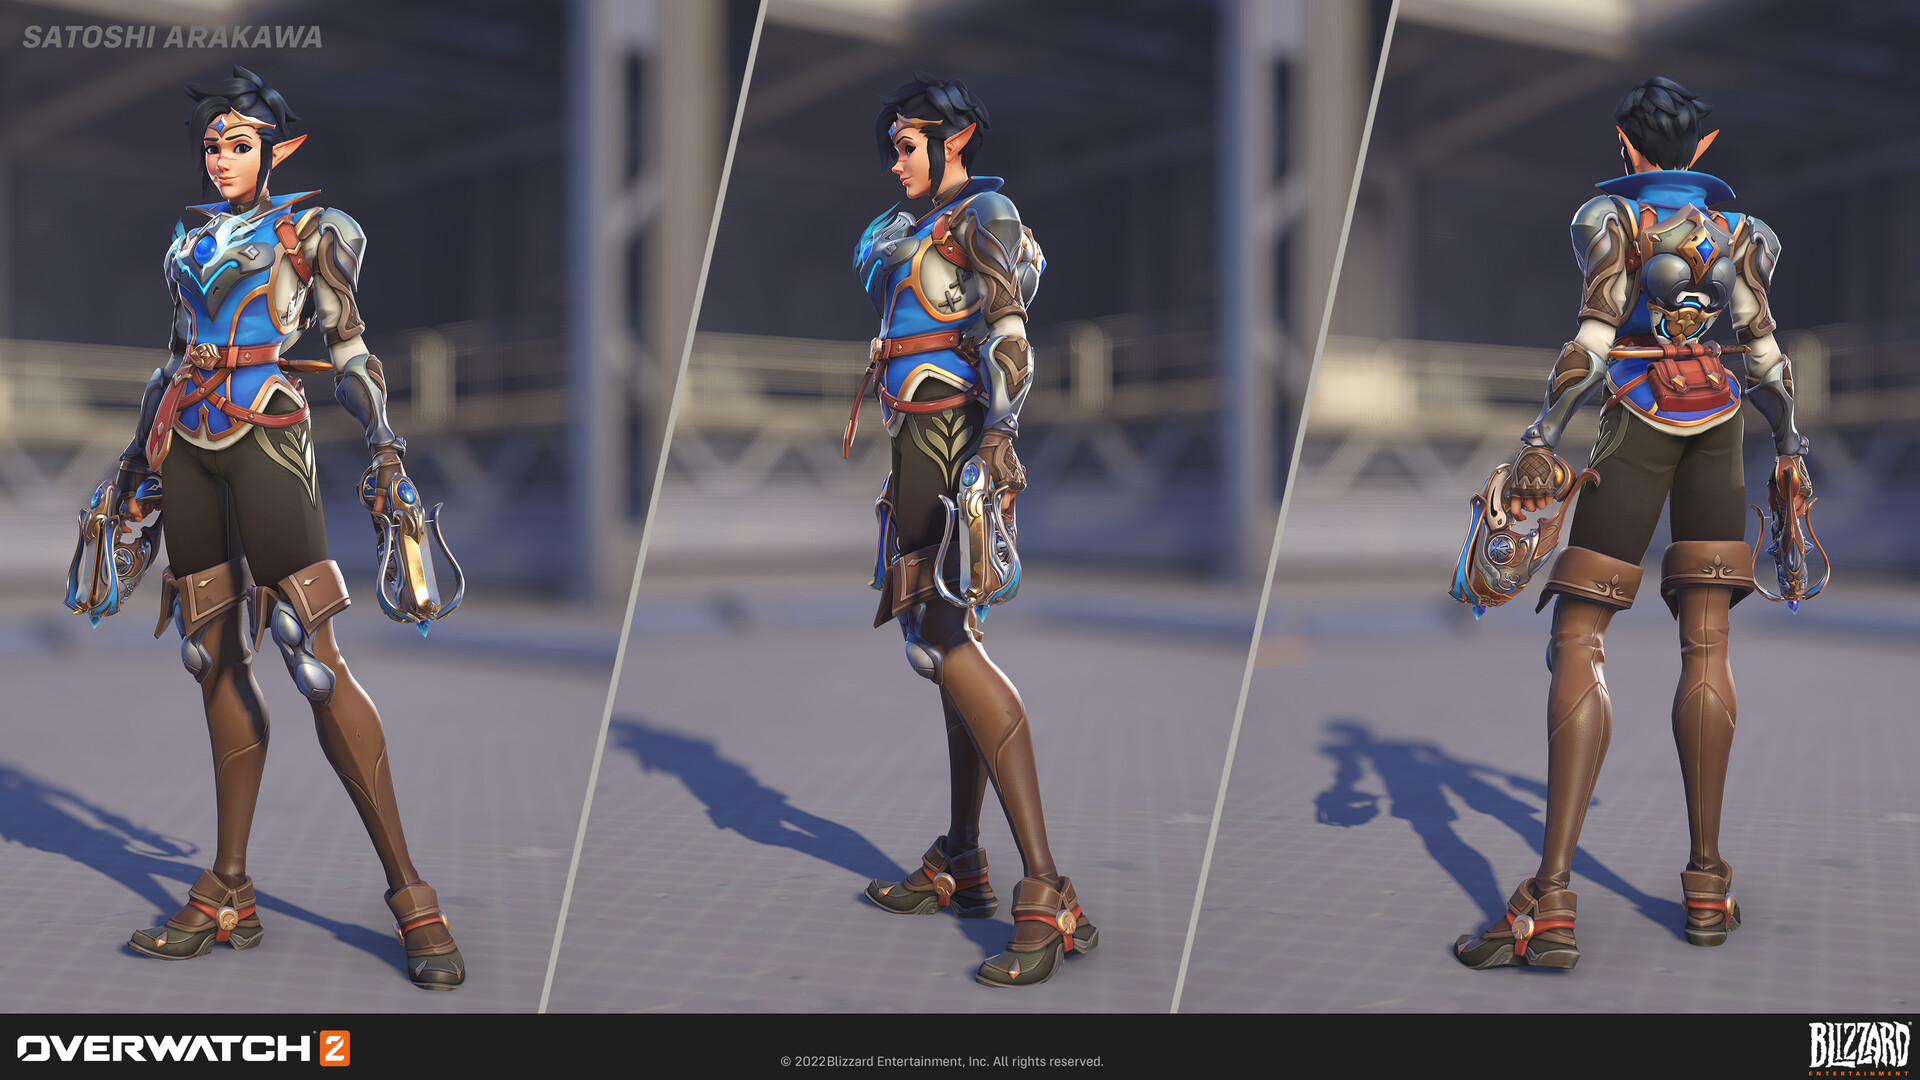 All customization options for Mythic Adventurer Tracer skin in